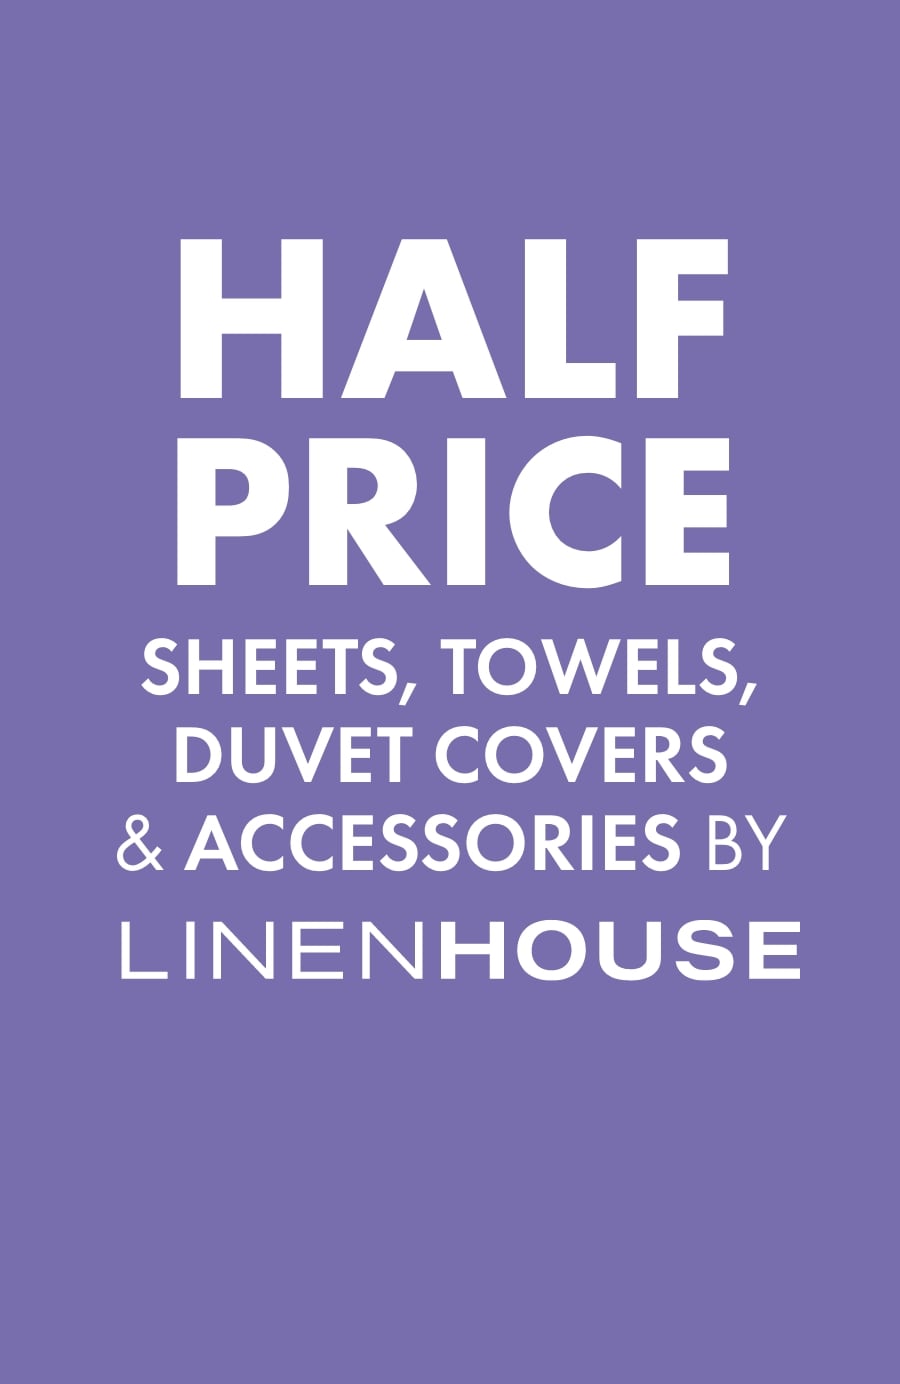 Half Price Sheets Towels, Duvet Covers & Accessories by Linenhouse